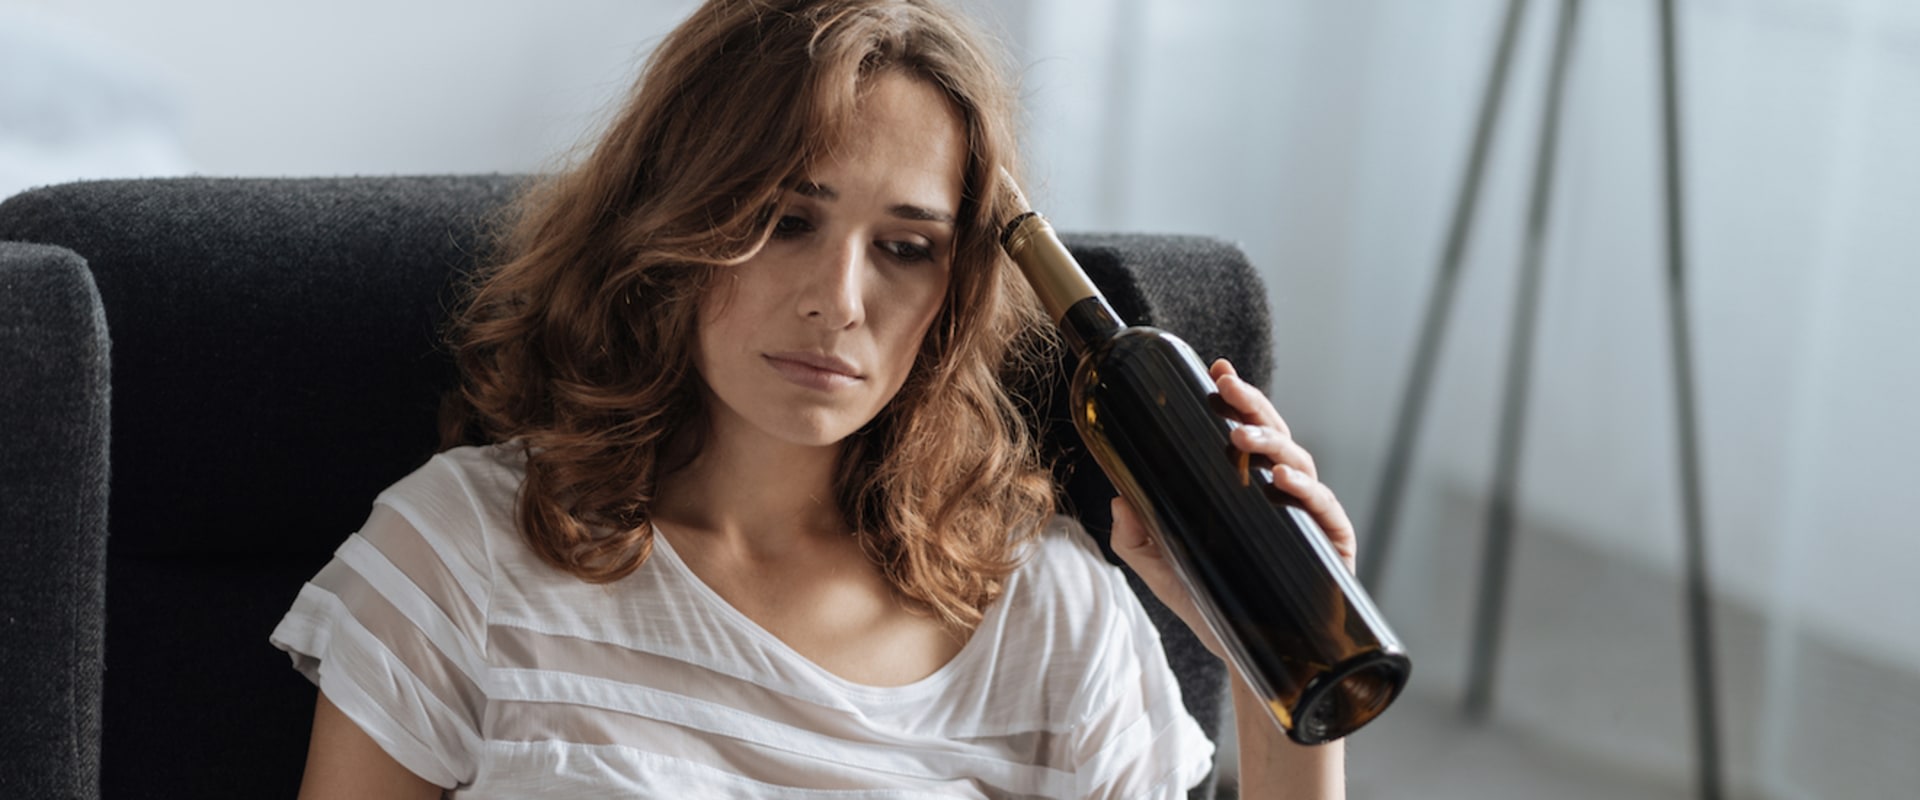 Does stopping drinking reduce depression?